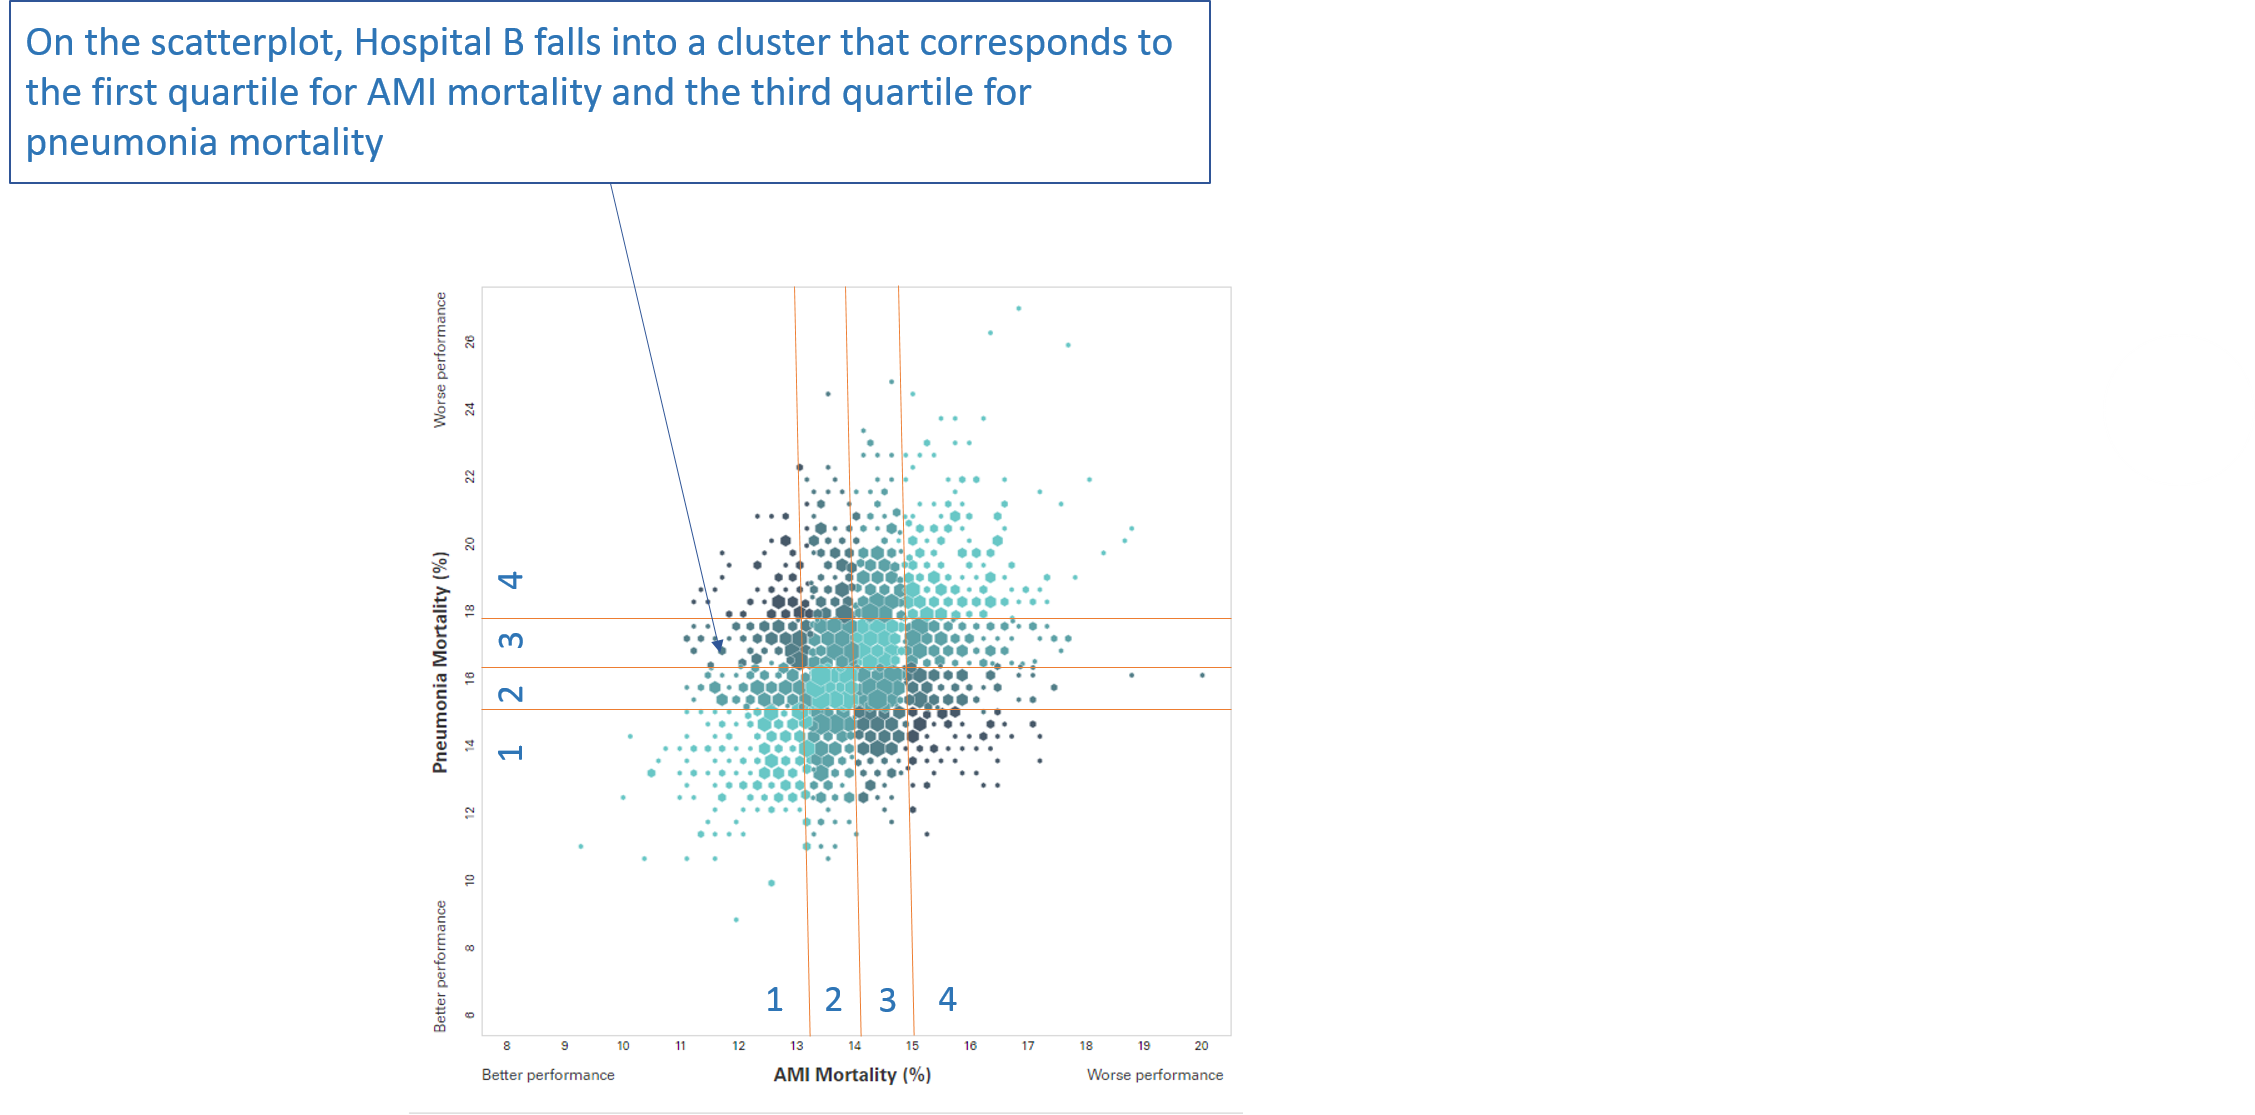 On the scatterplot, the hospitals are displayed in clusters that corresponds to their measure results and group rankings. 